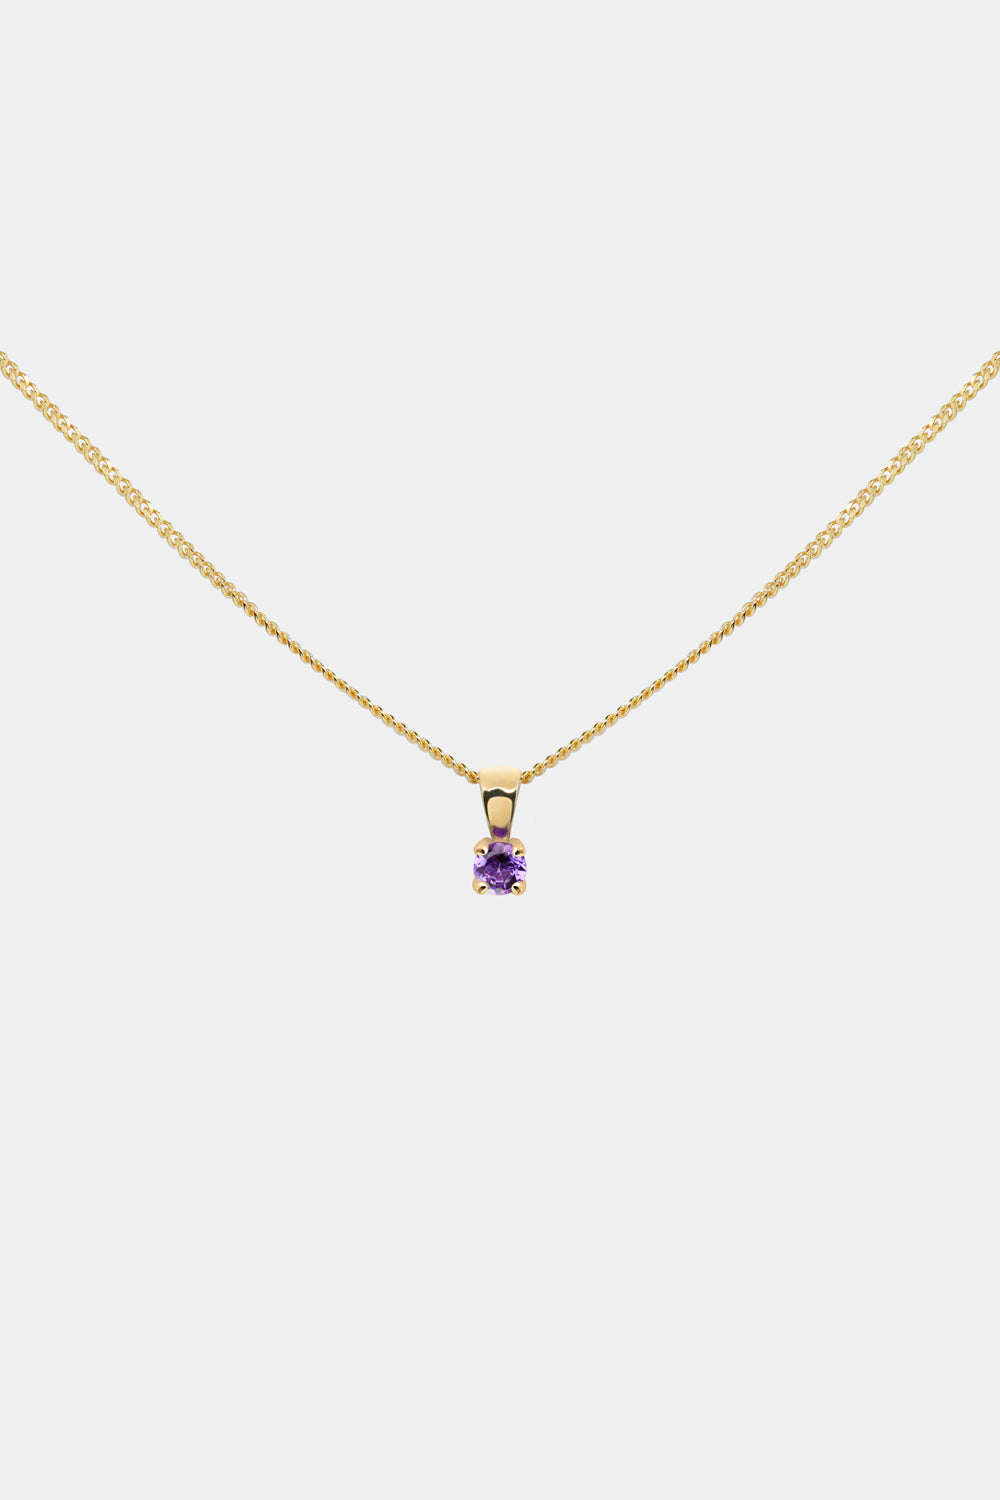 Birthstone Necklace | 9K Yellow Gold